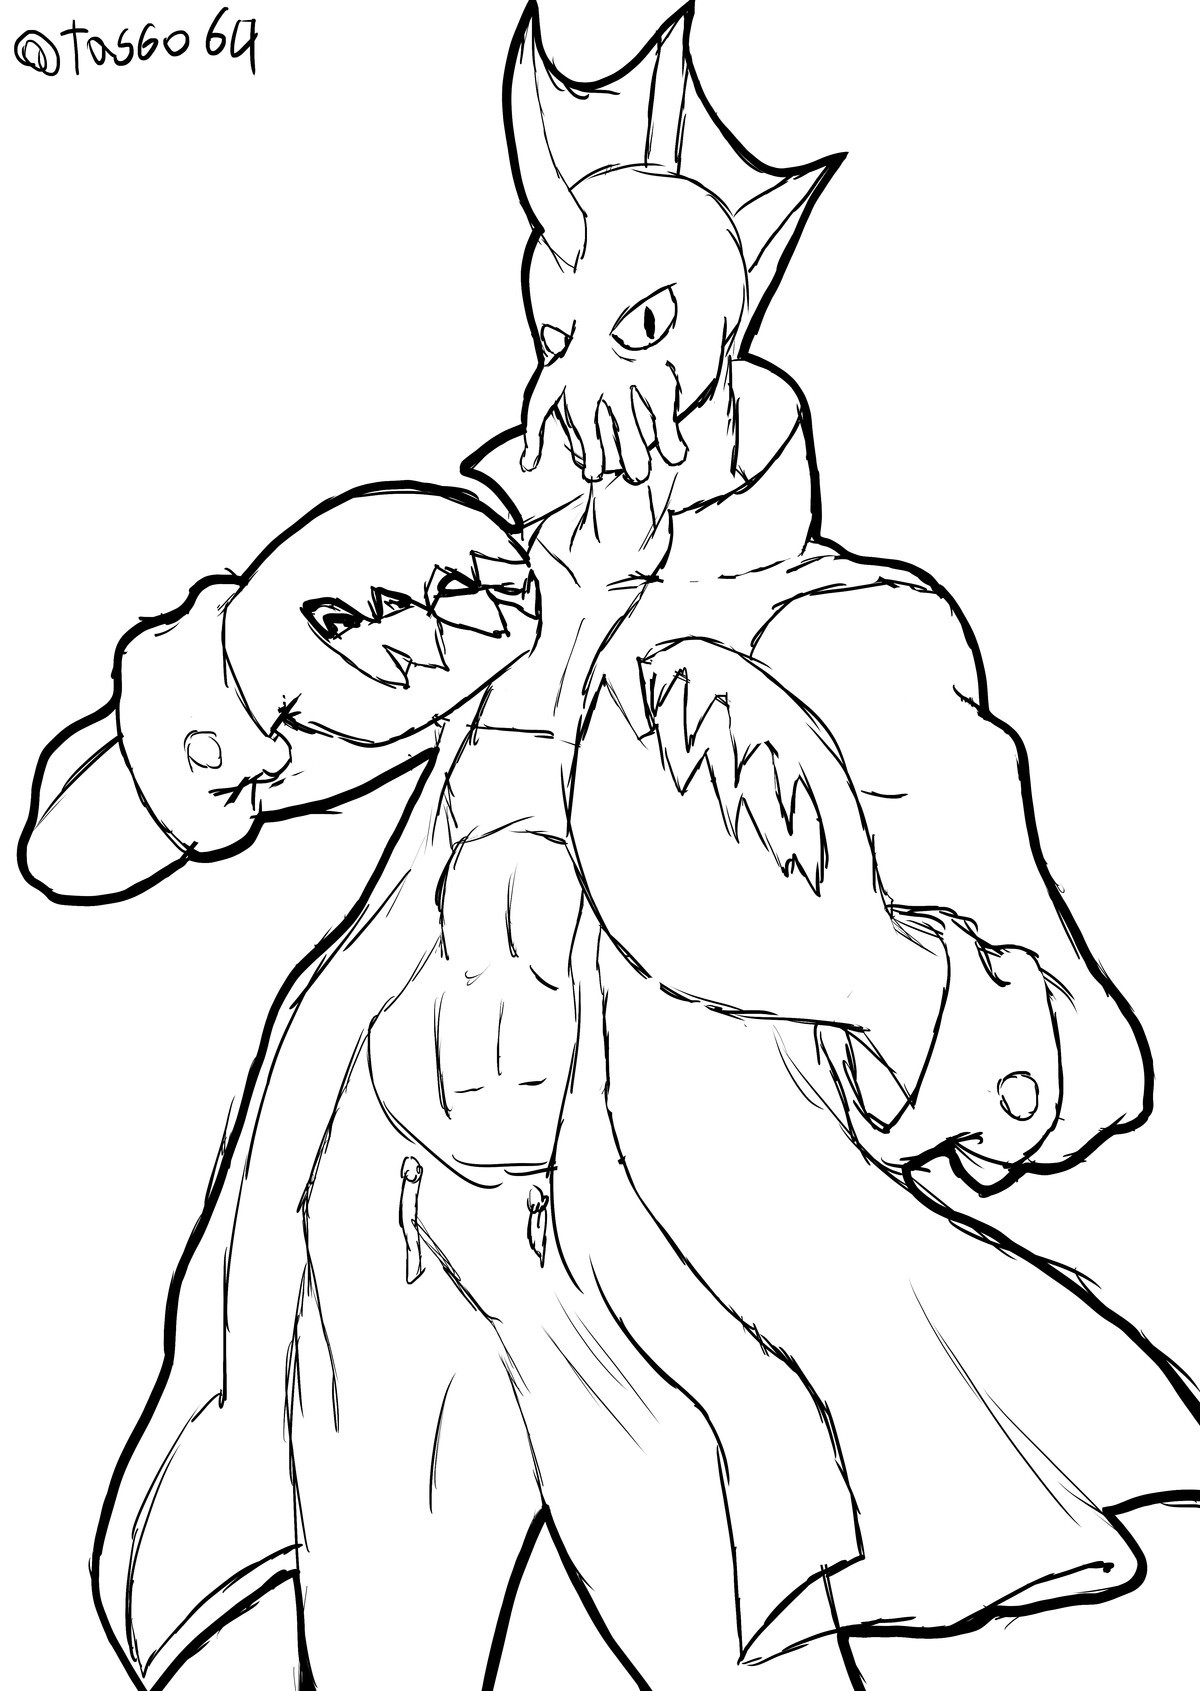 DailyDrawing day 164. Hes dr zoidberg. i figured it would be fun to draw him as a dnd character. a triton cleric join list: SupernerdART (100 subs)Mention Histo